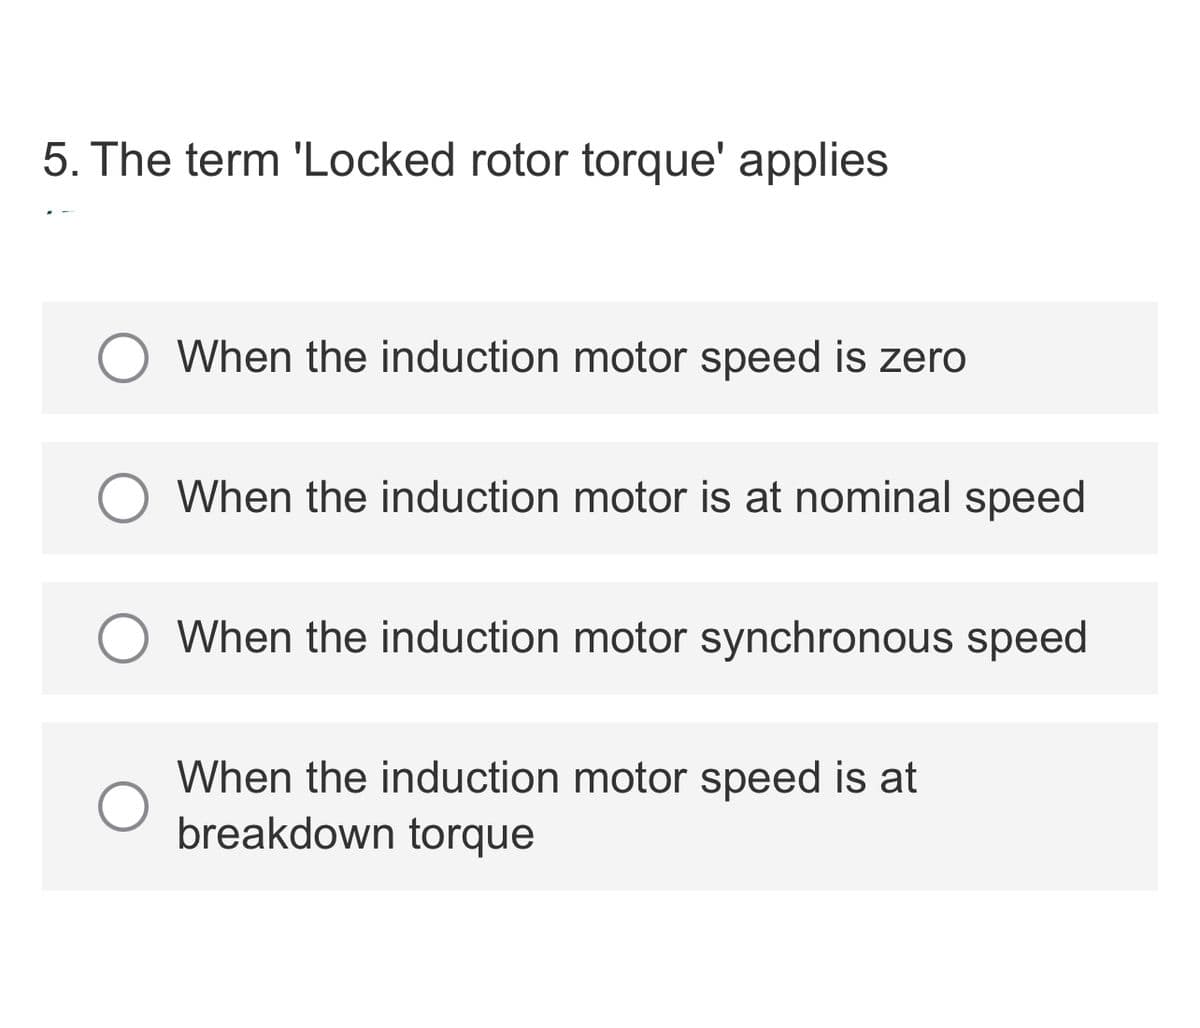 5. The term 'Locked rotor torque' applies
When the induction motor speed is zero
When the induction motor is at nominal speed
When the induction motor synchronous speed
When the induction motor speed is at
breakdown torque
